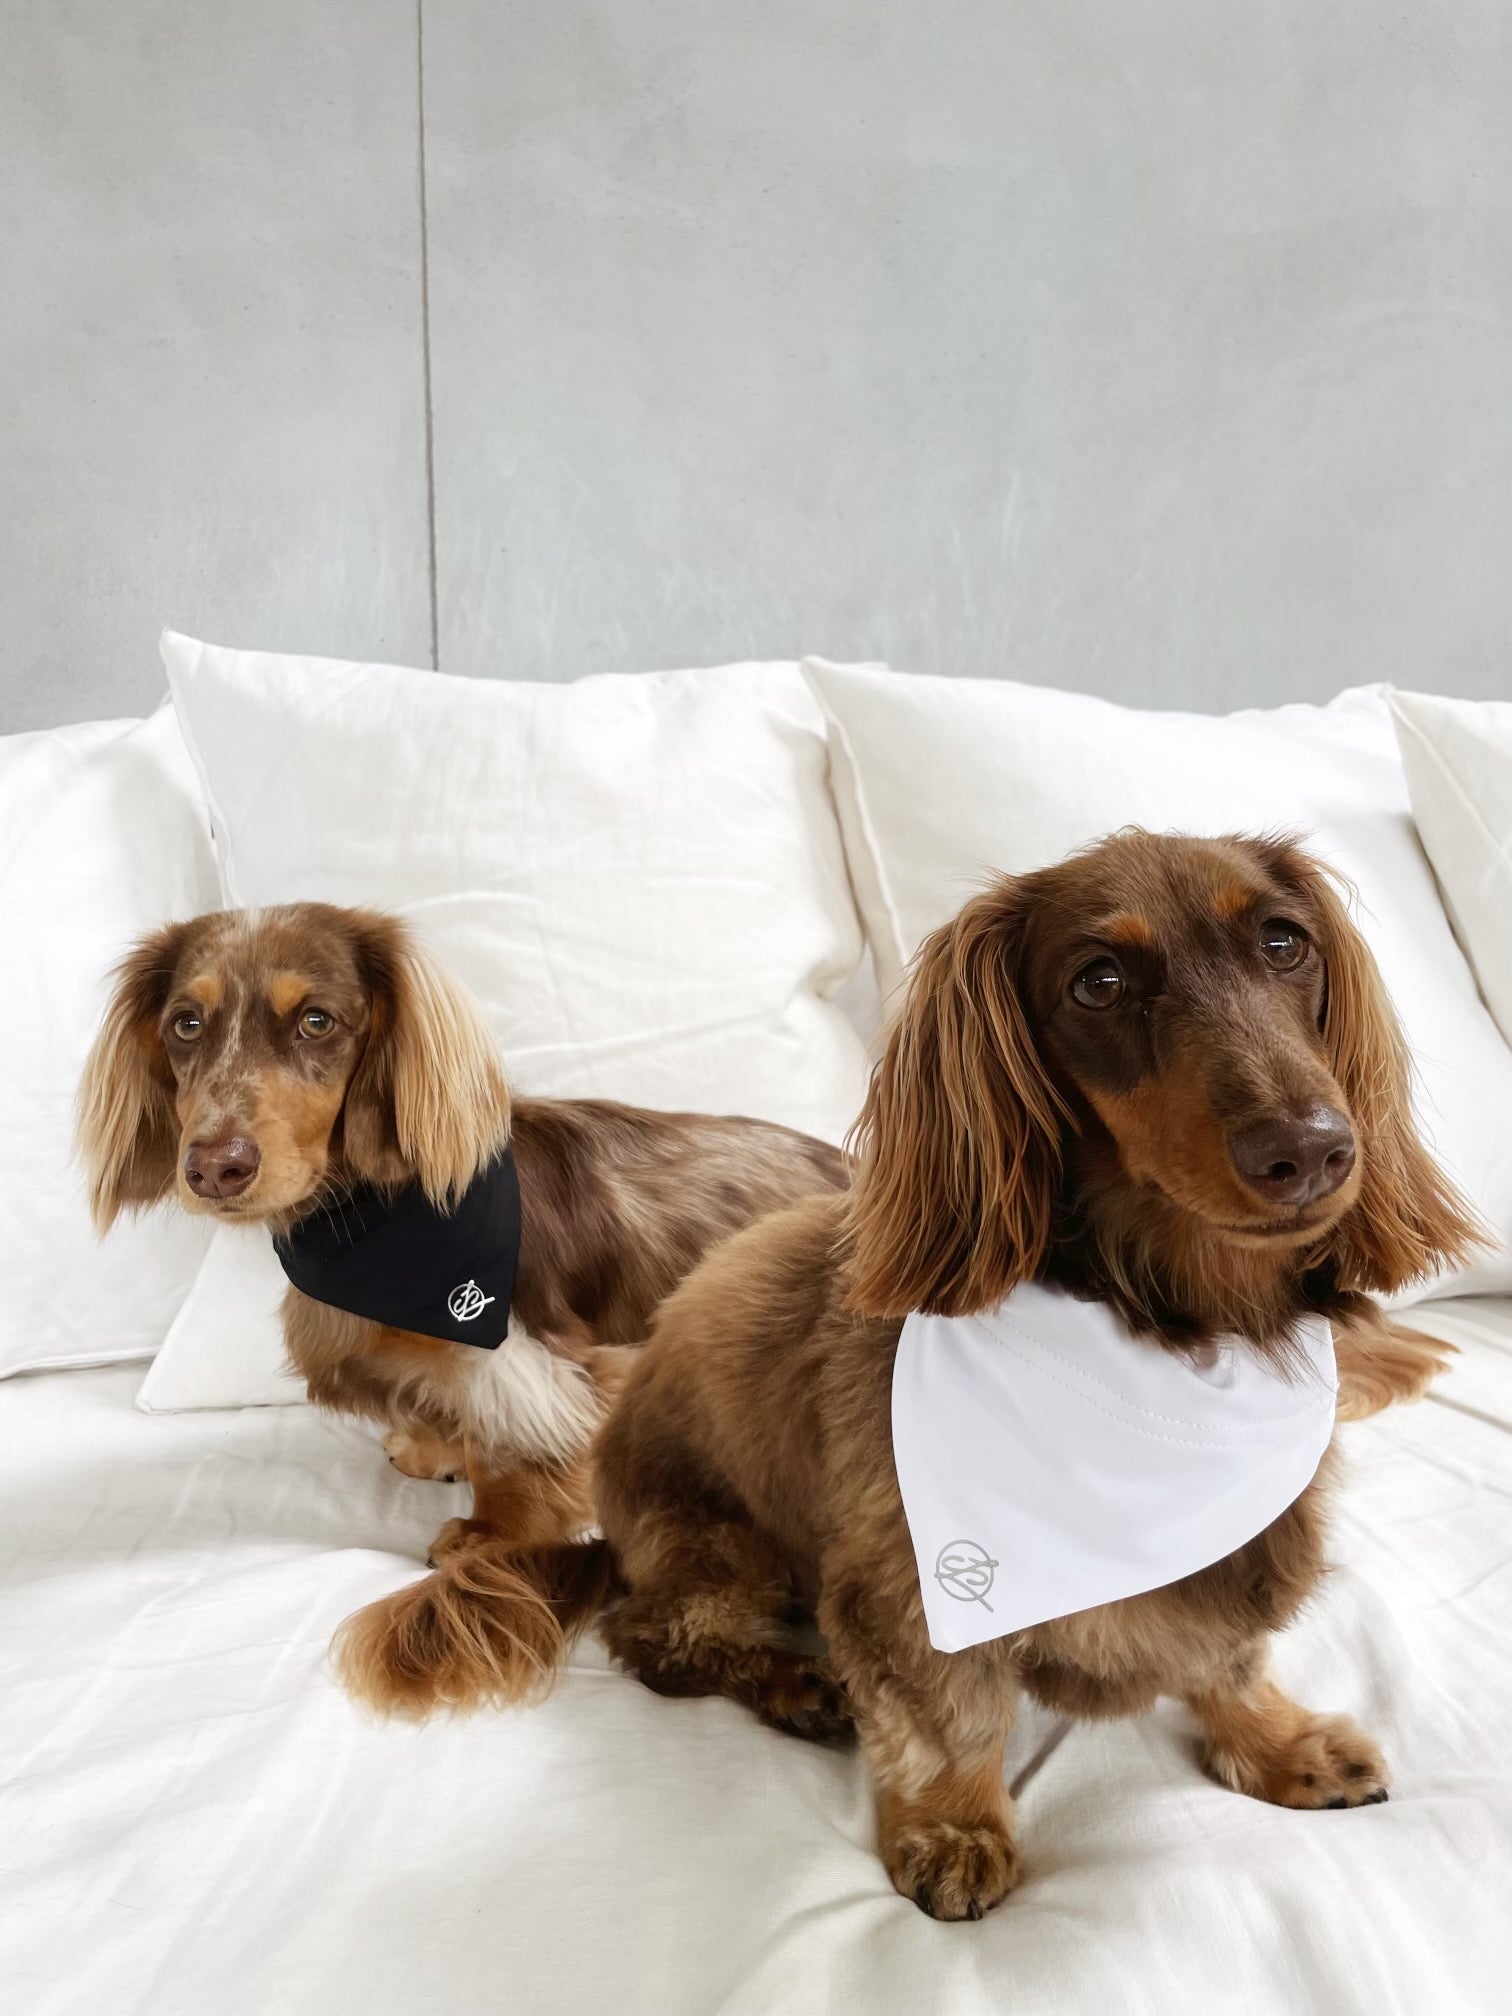 Front view of two hairy brown dogs with one wearing White Doggy Bandana and the other a black doggy bandana